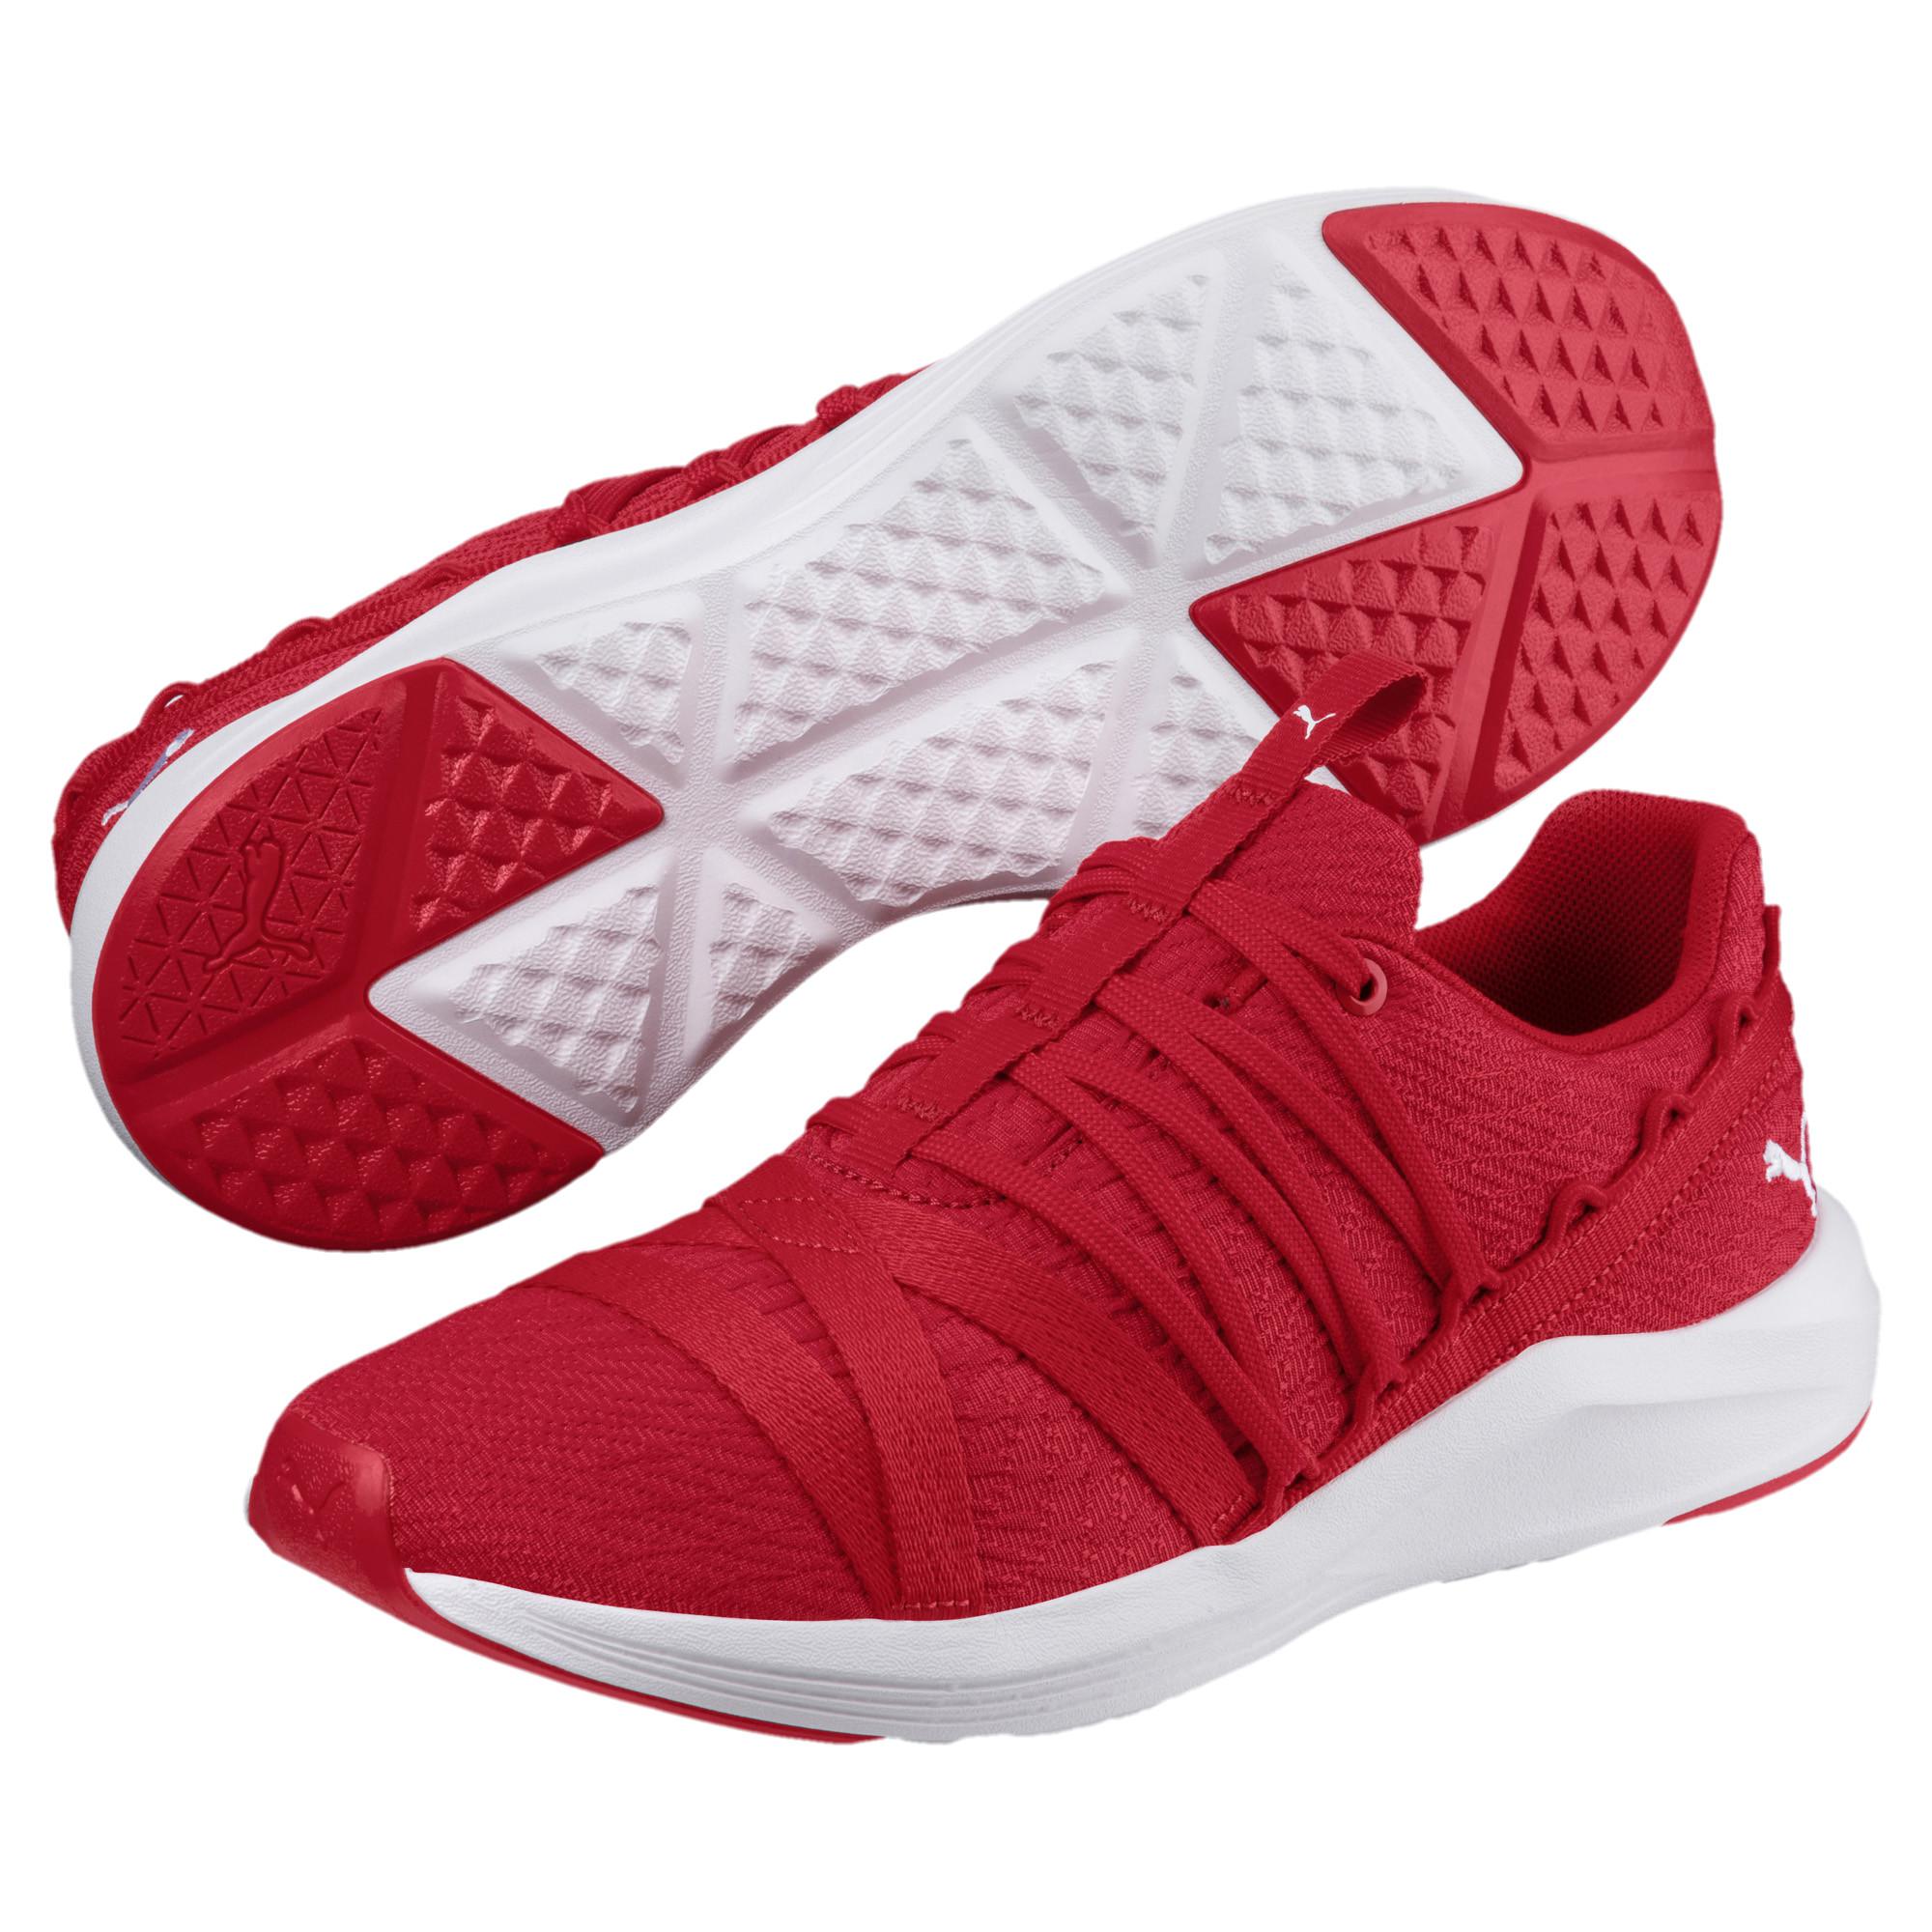 PUMA Prowl Alt 2 Women's Training Shoes in Red - Lyst